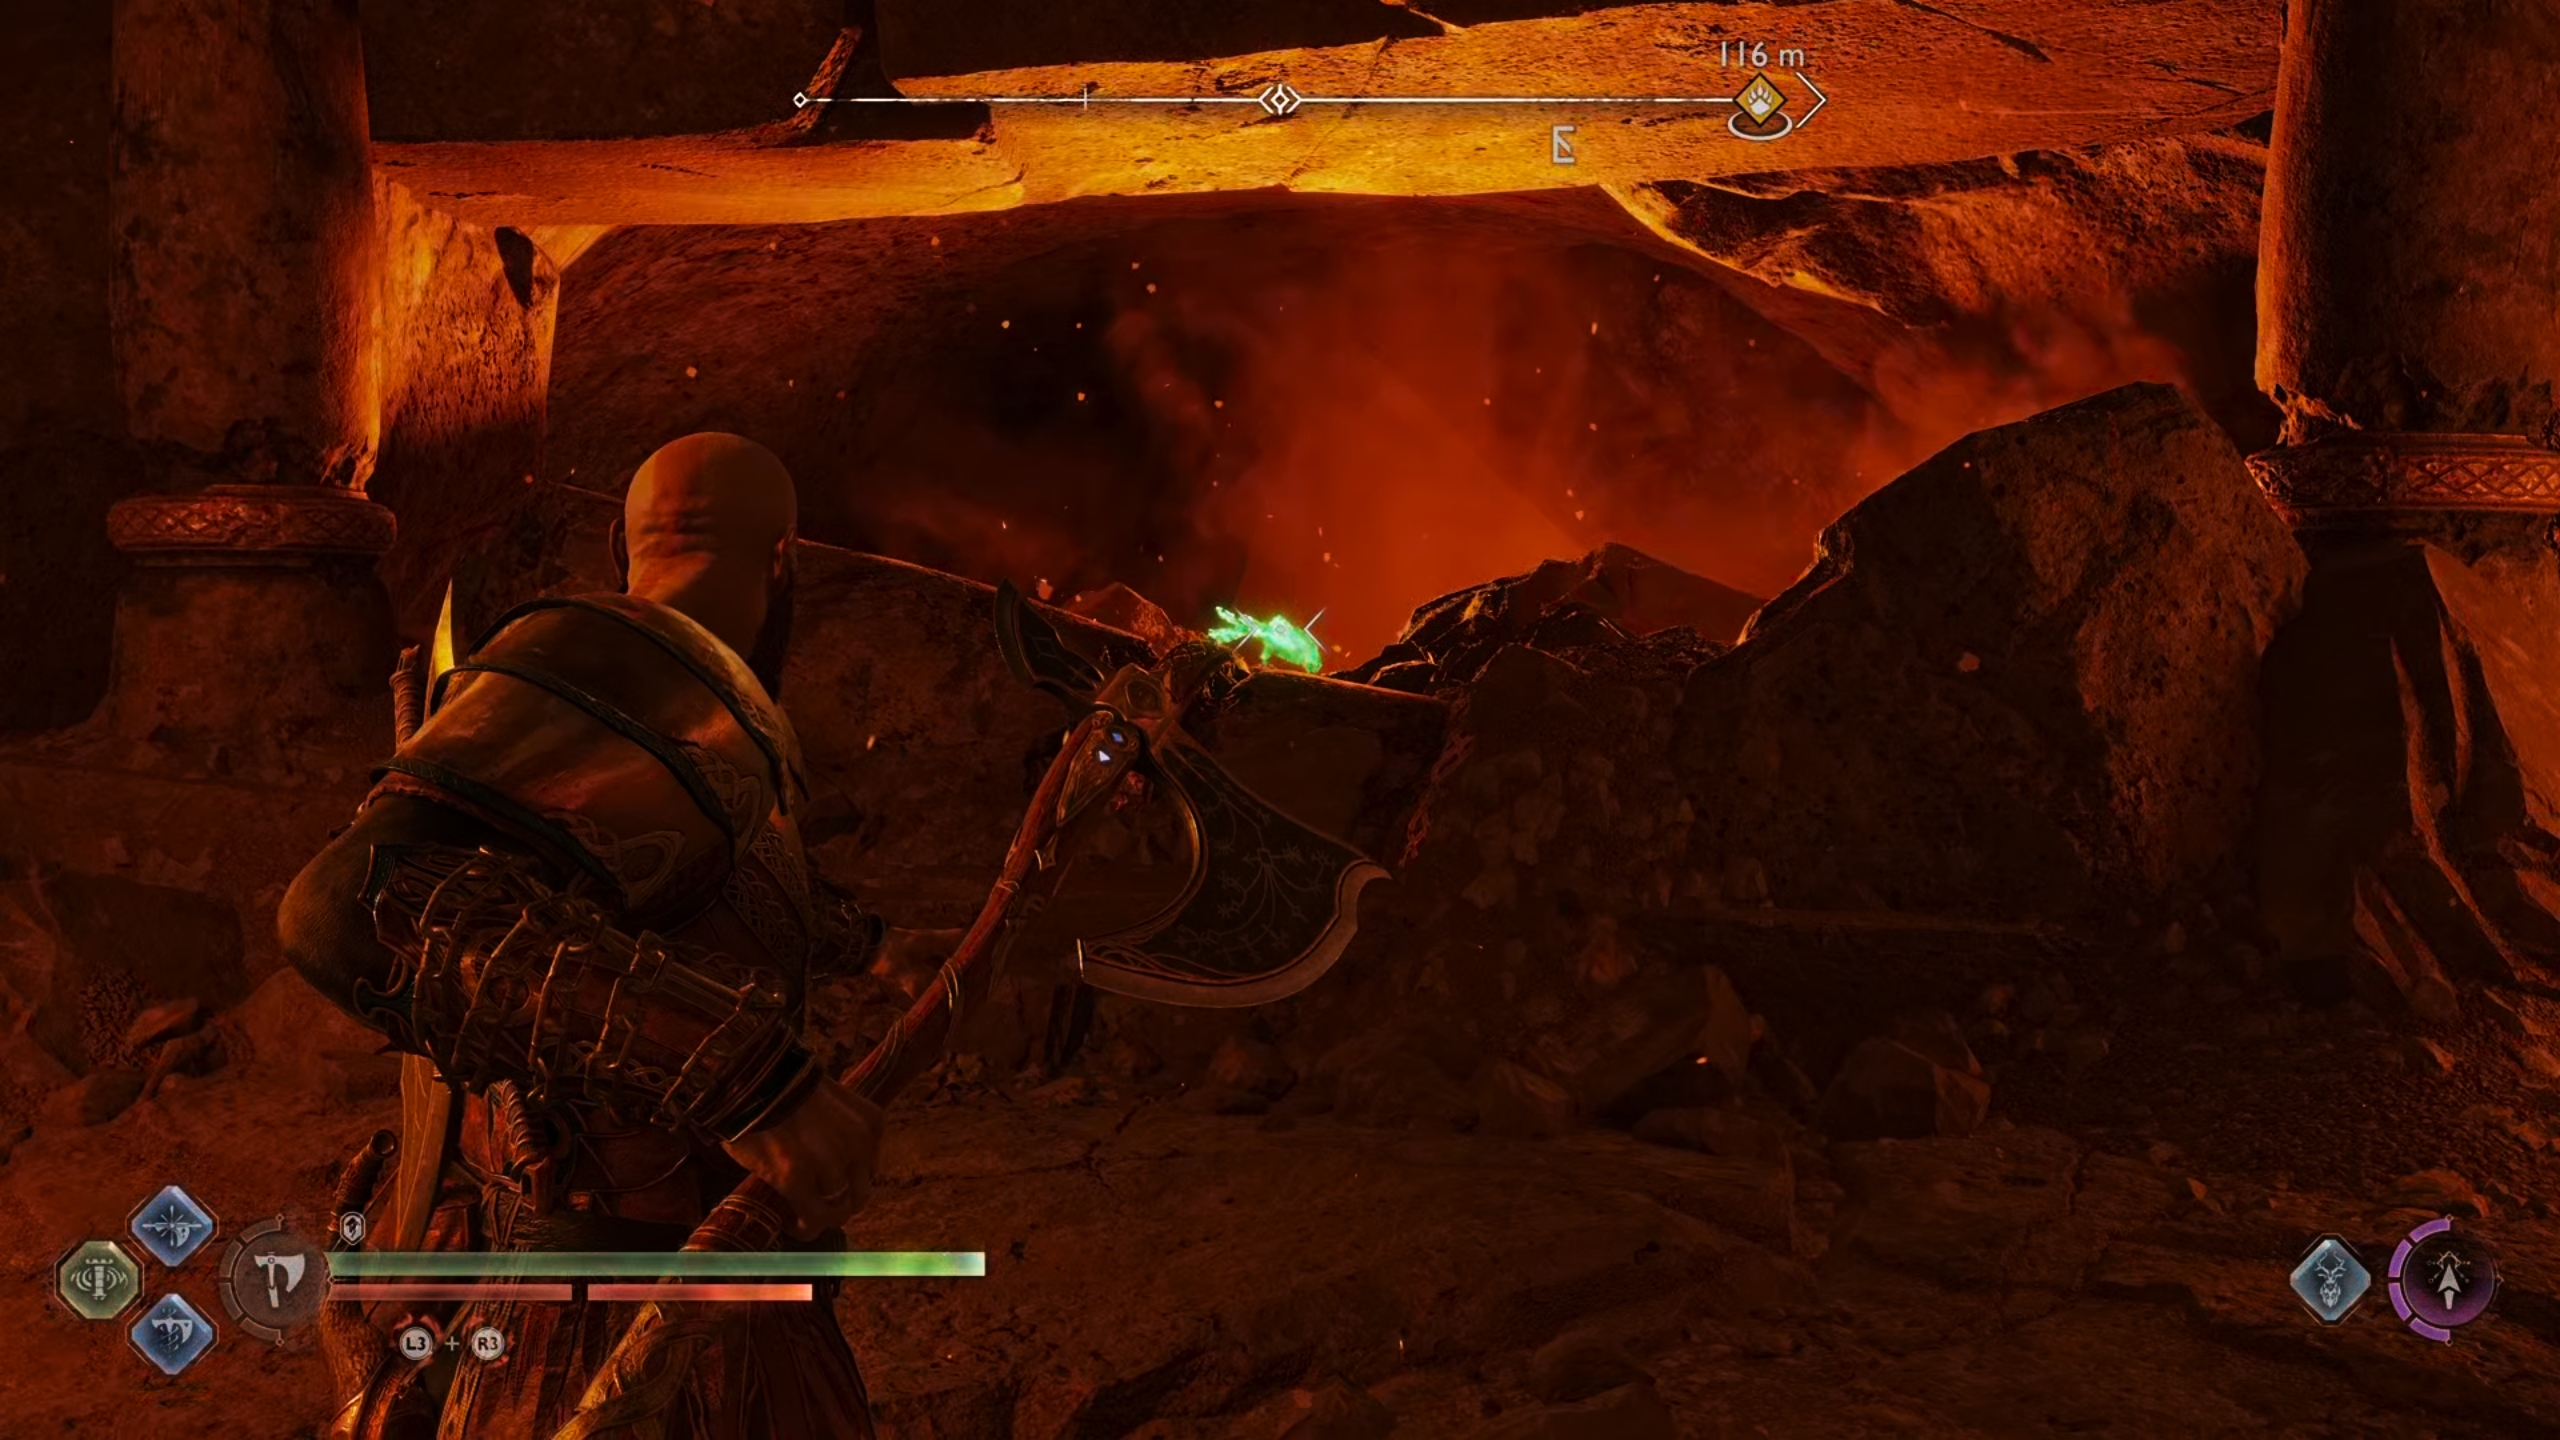 You can see the Odin’s Raven in the same cave where you found the Legendary Chest.